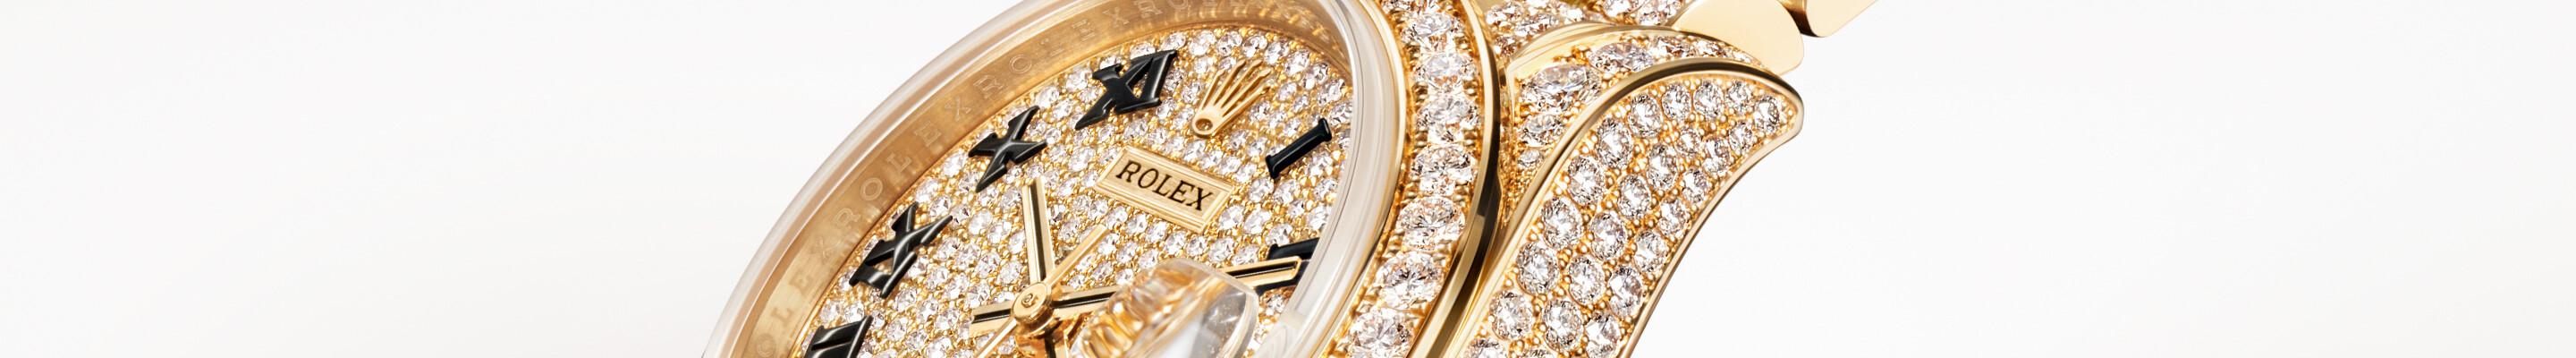 Rolex Lady-Datejust at The Vault